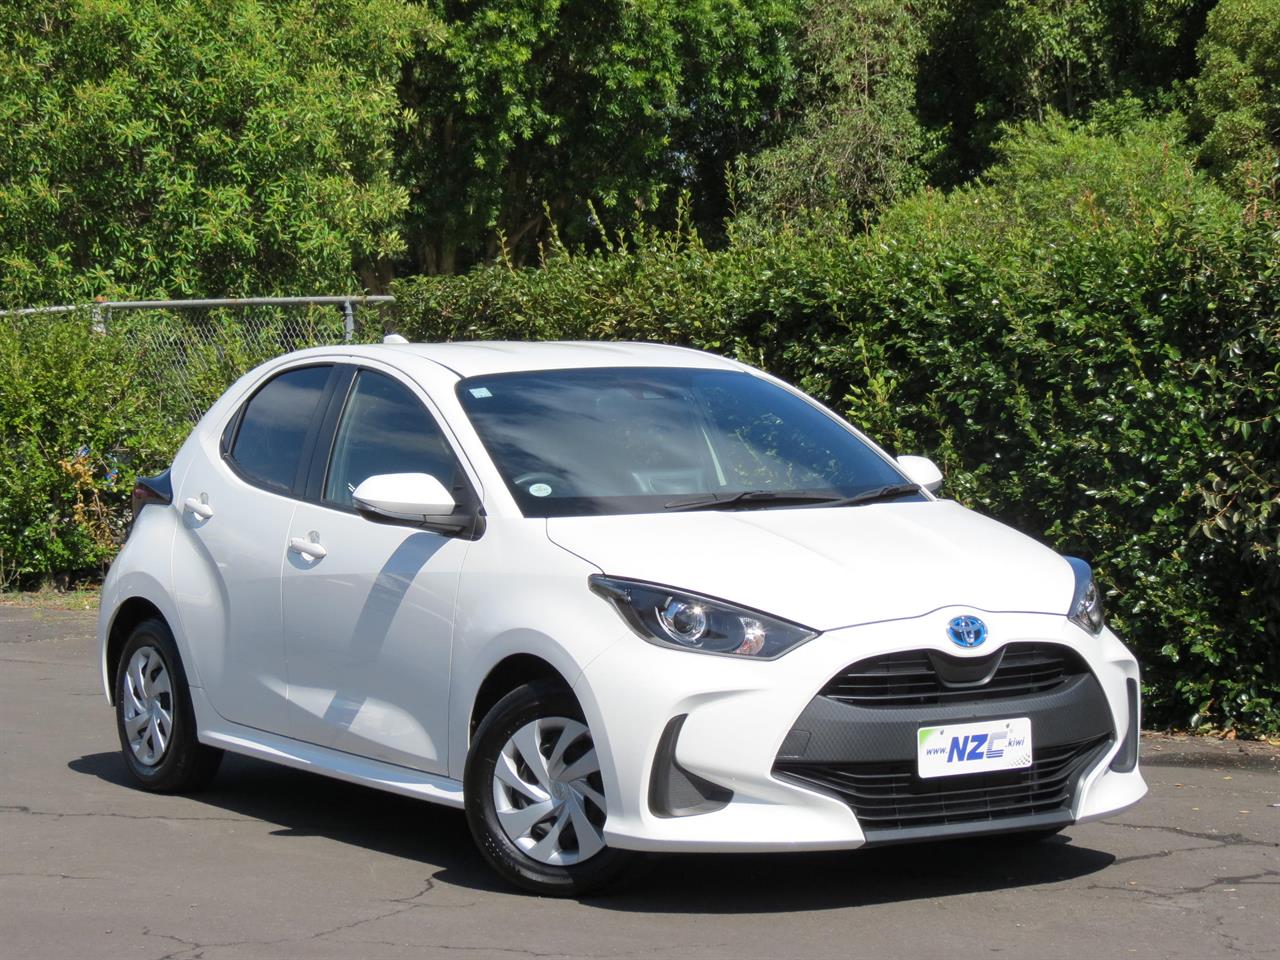 NZC 2020 Toyota Yaris just arrived to Auckland